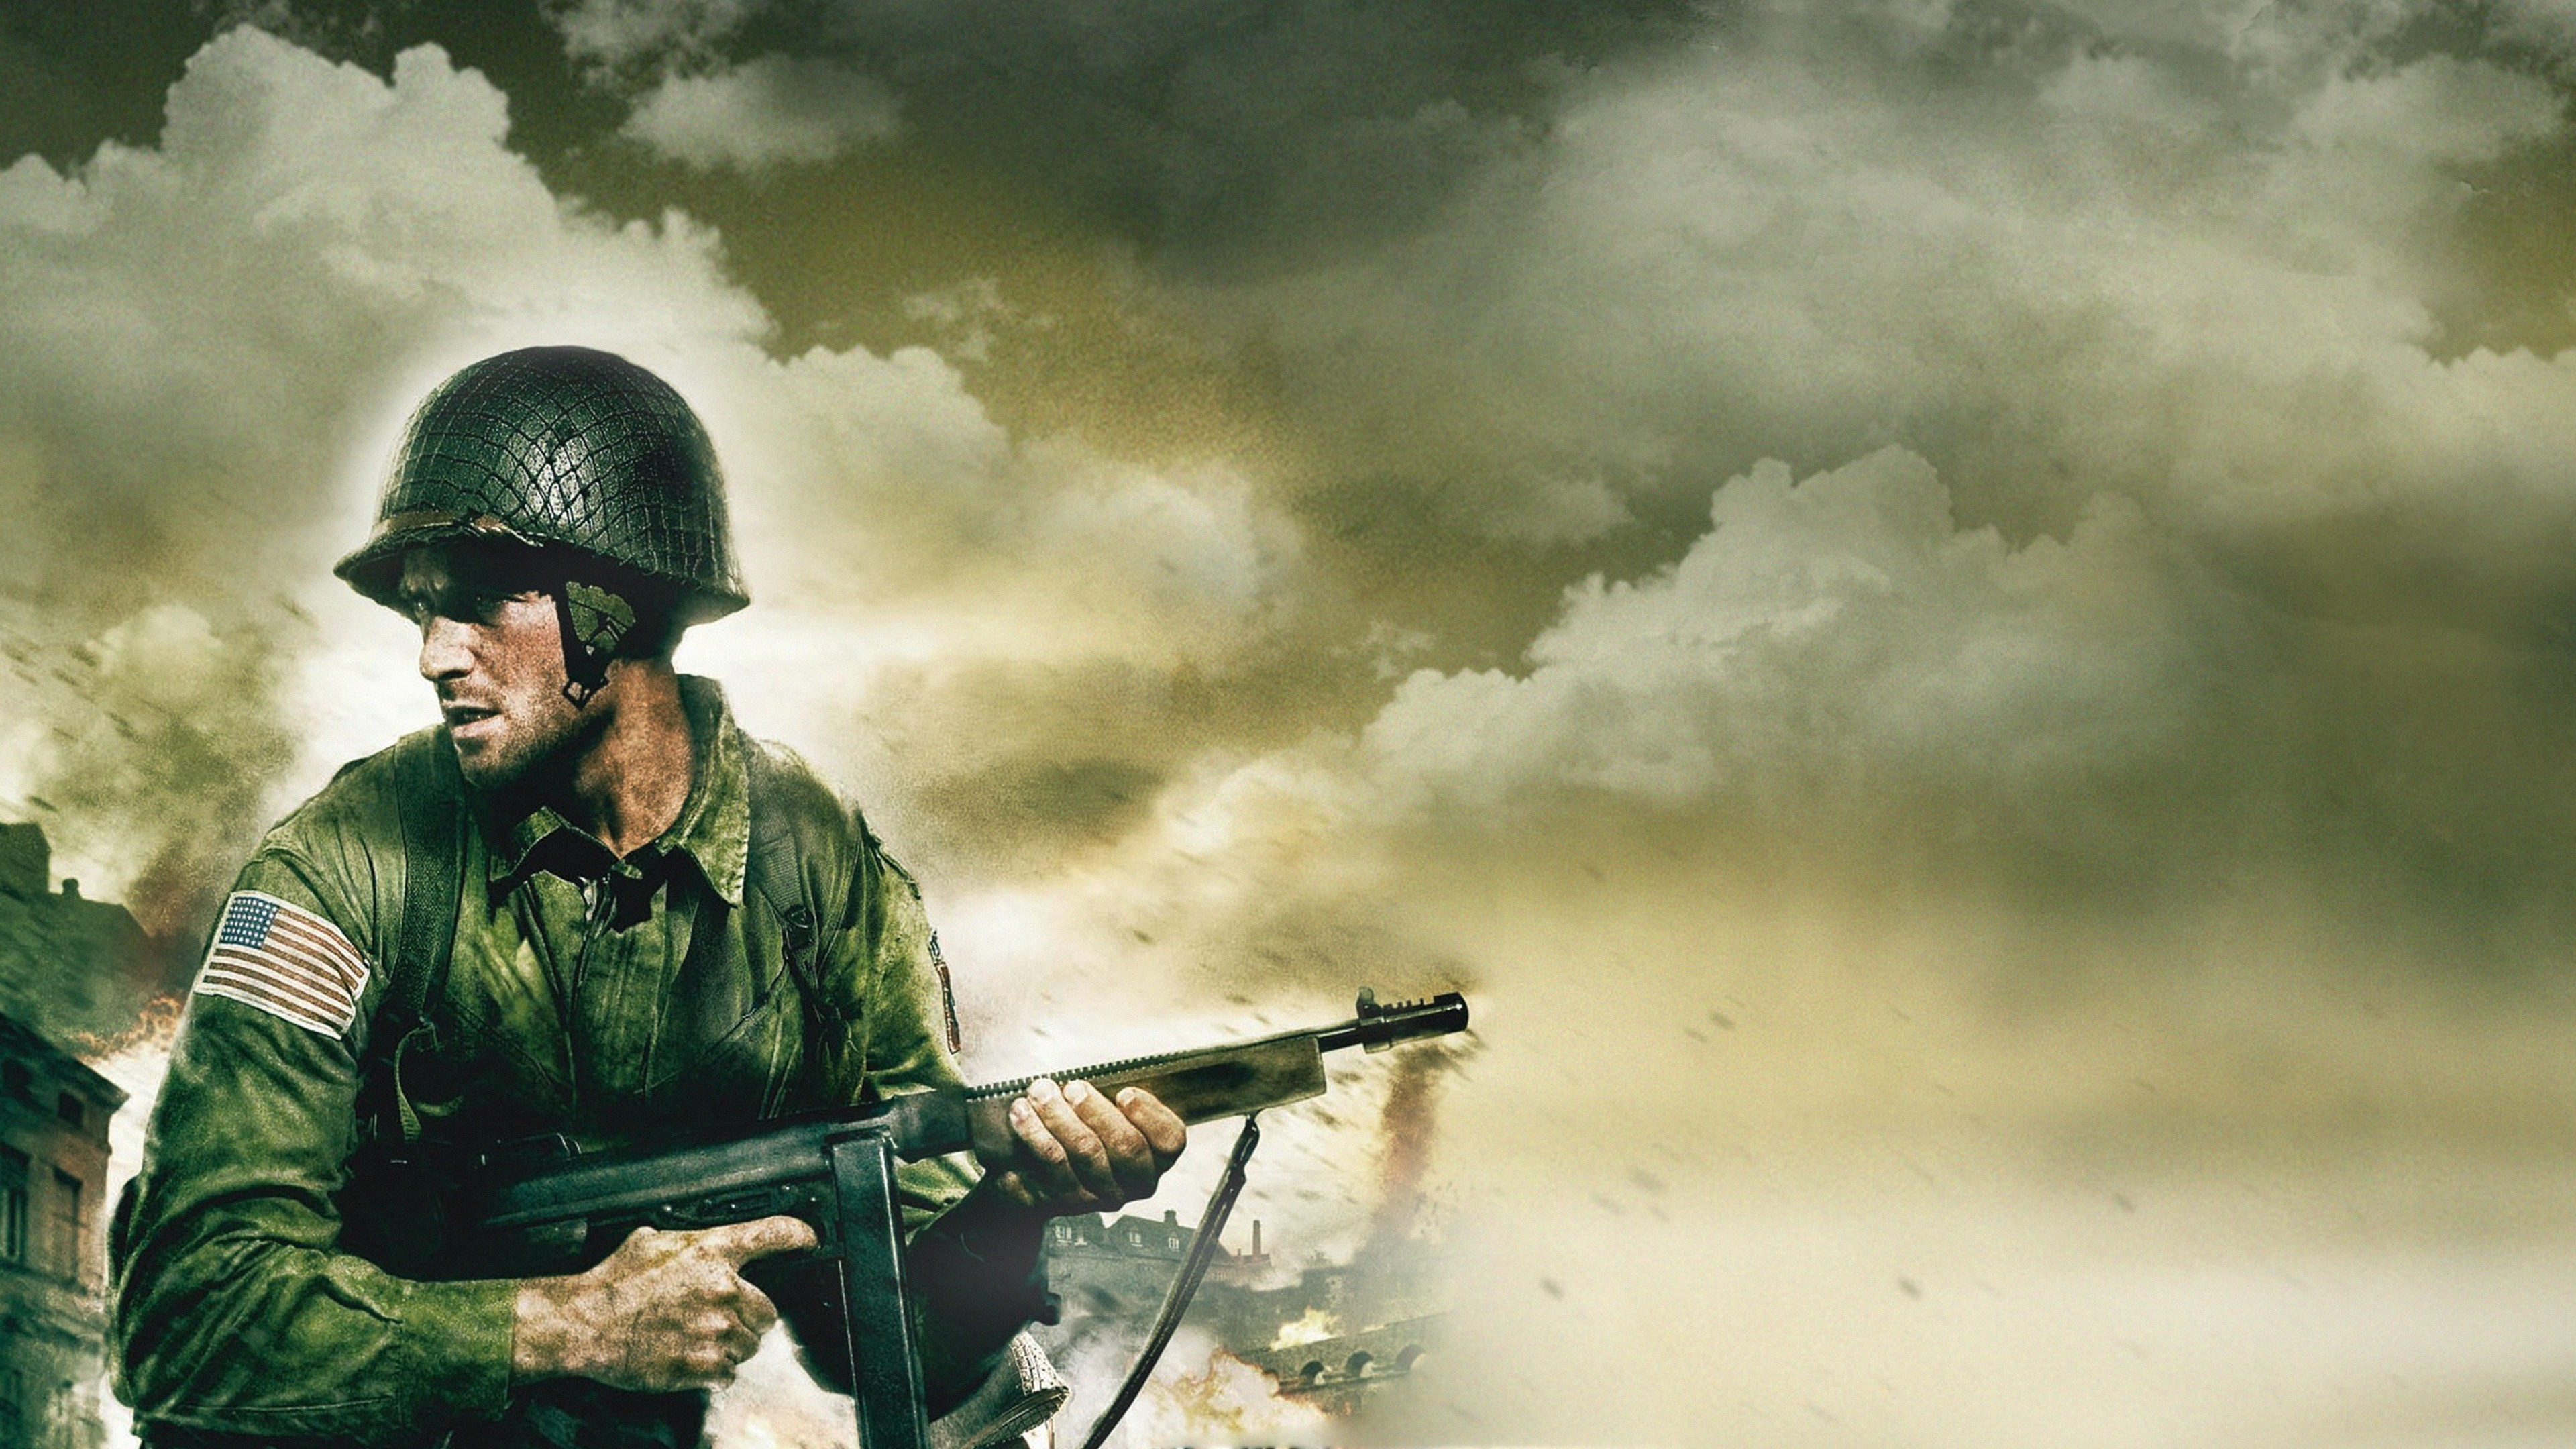 Medal of honor game online free